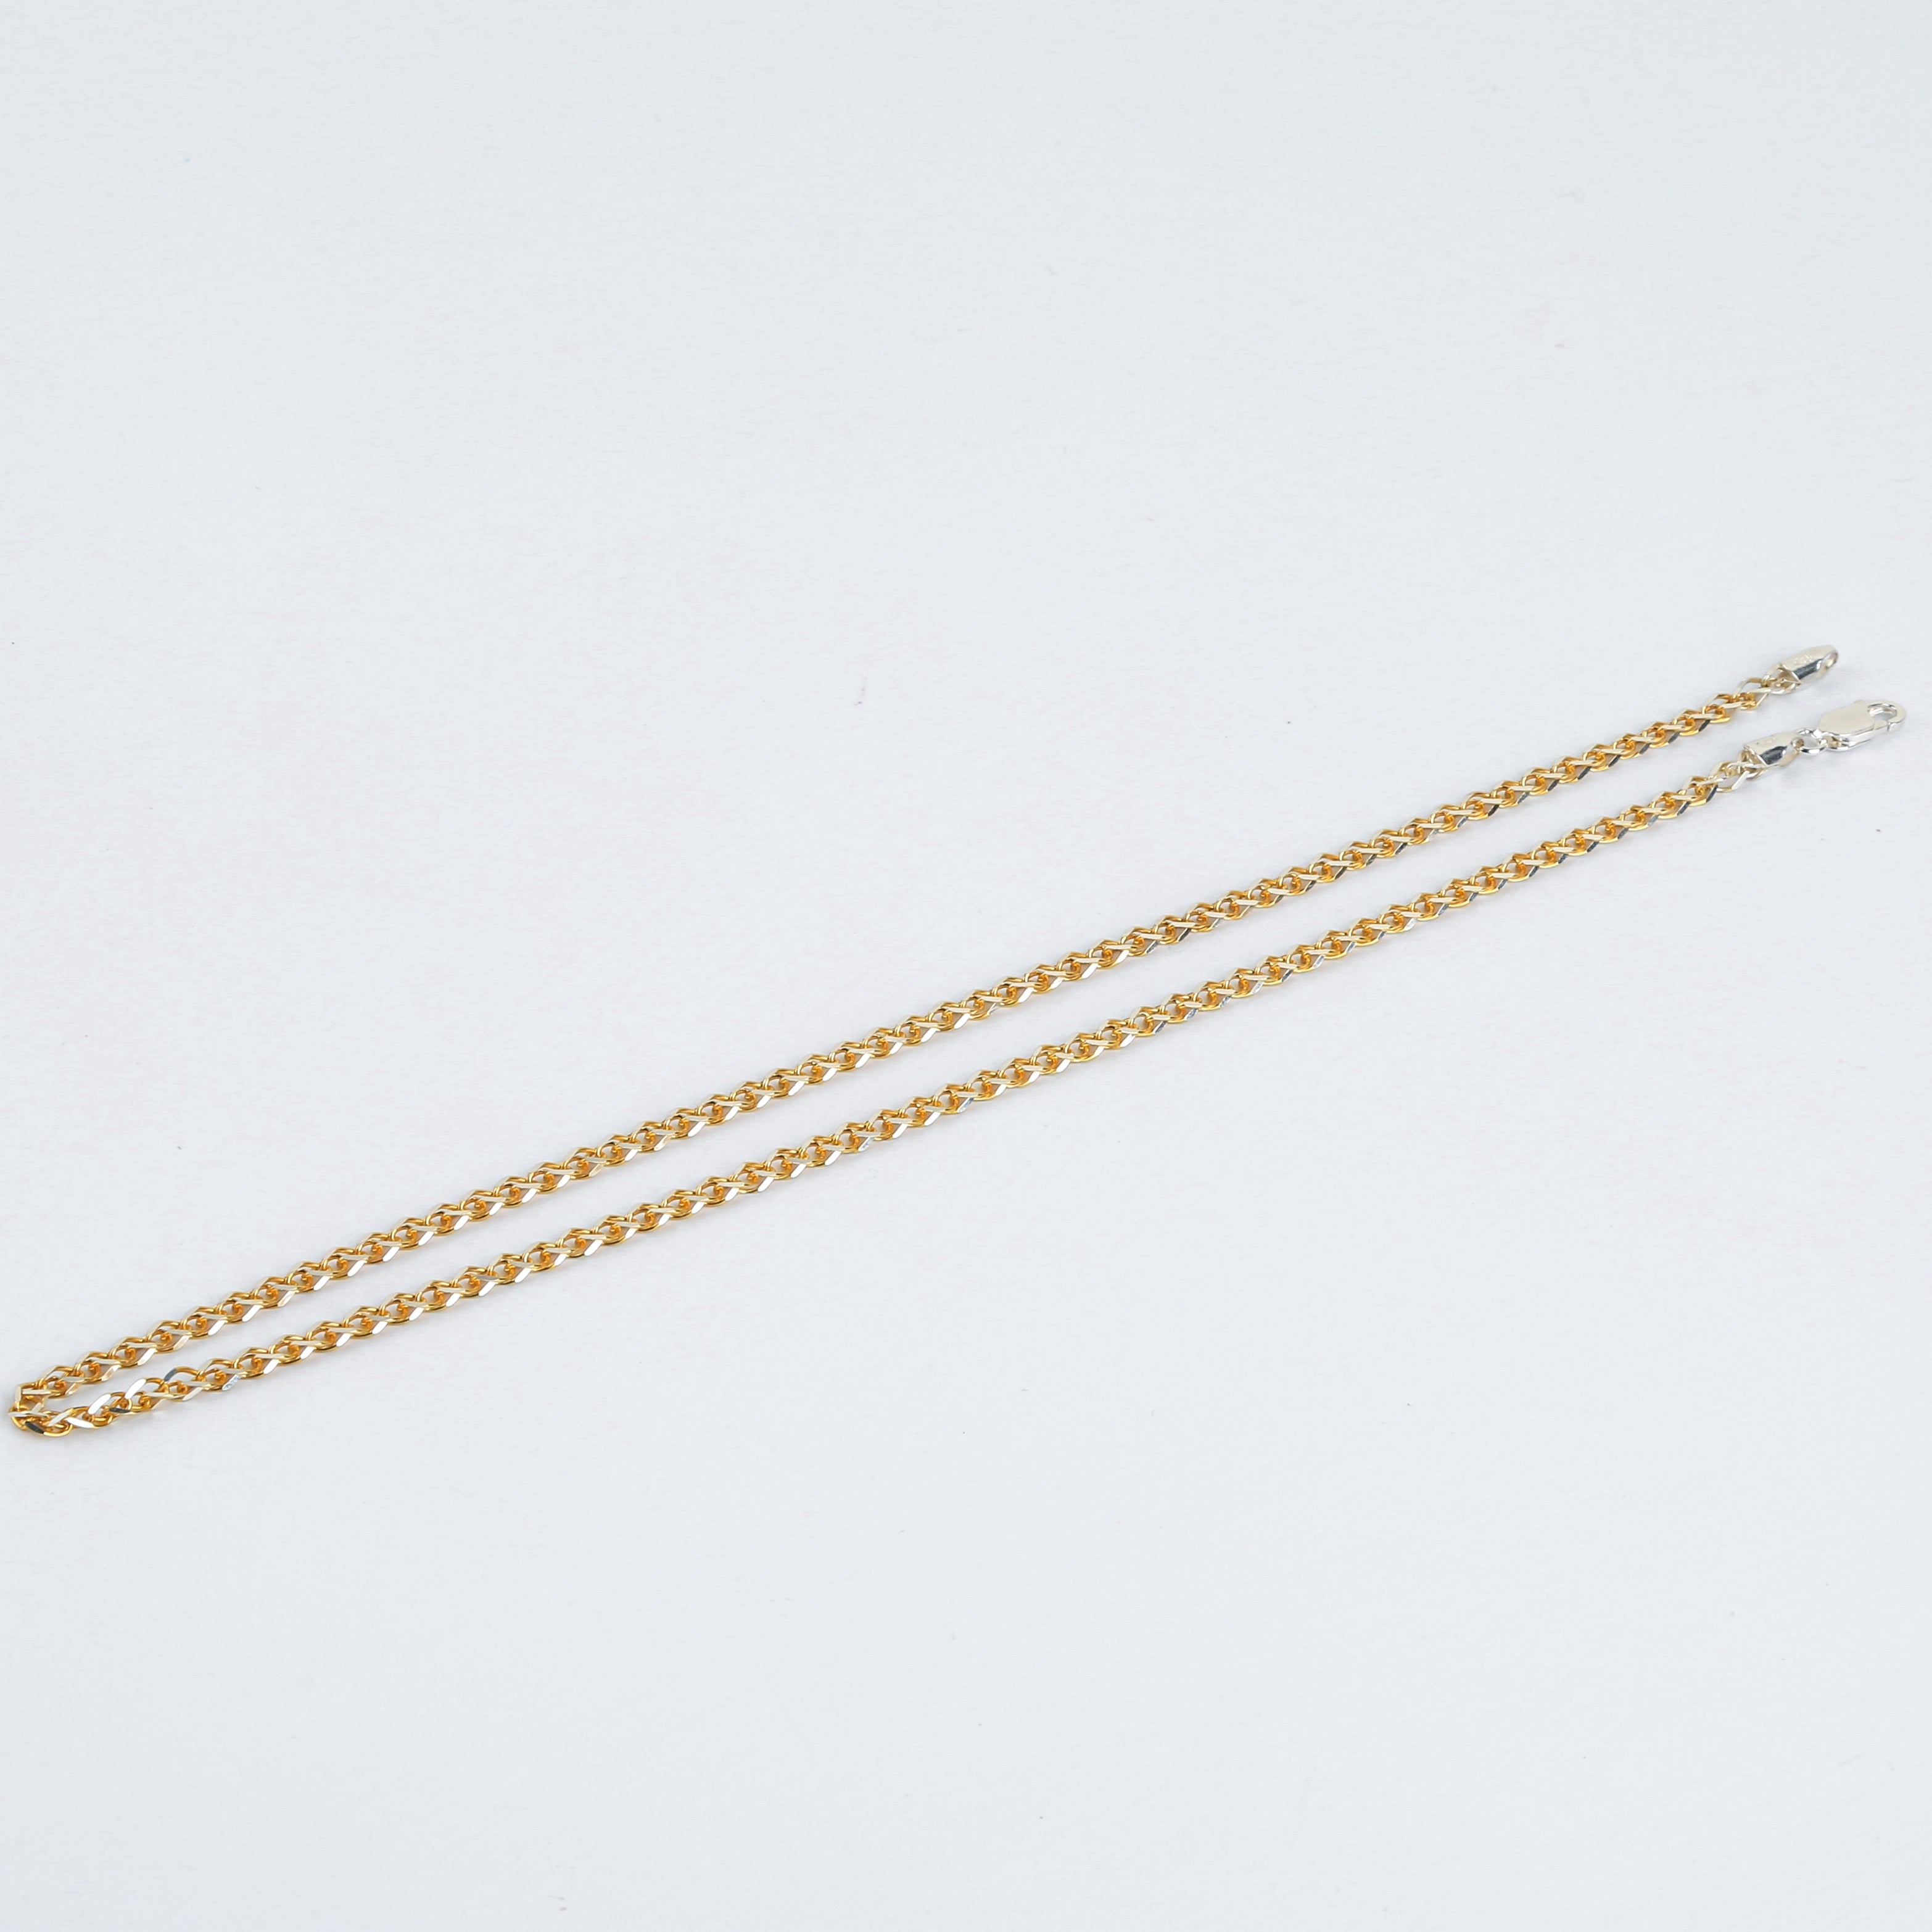 Golden 3.5mm Wheat Chain (18 Inches)